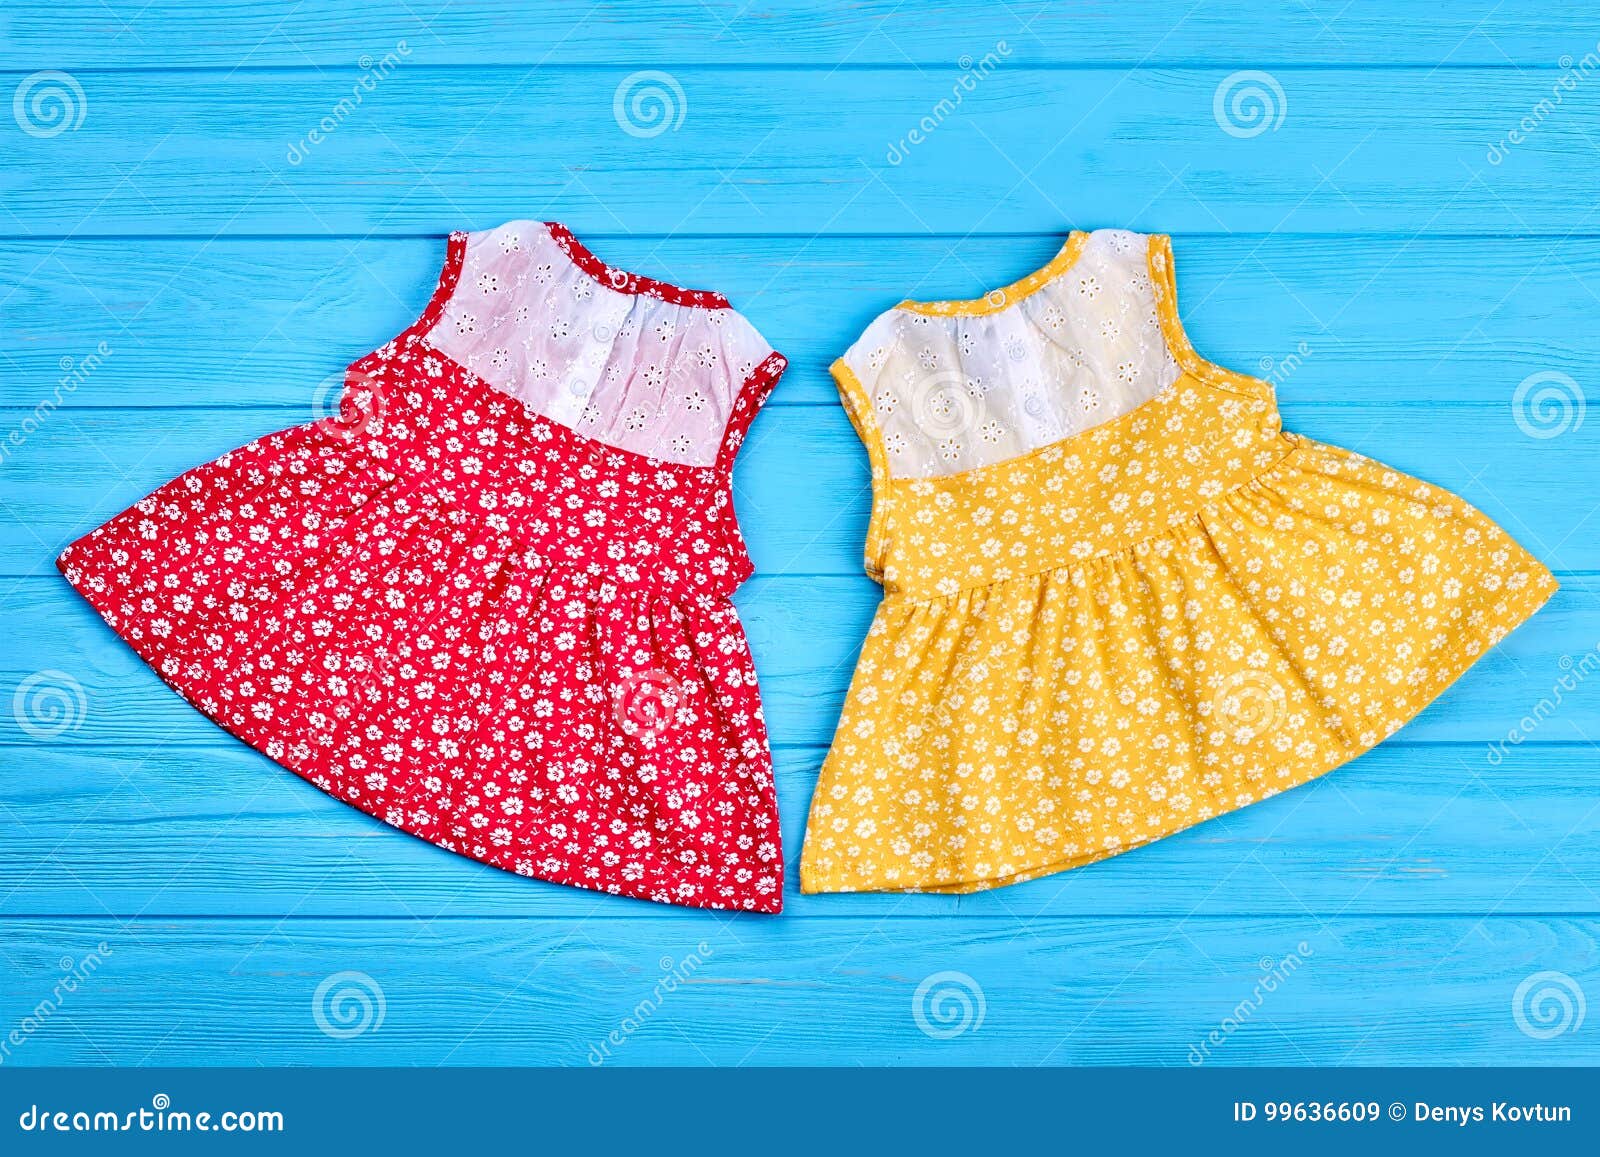 Pretty Cotton Infant Baby Dresses. Stock Image - Image of beautiful ...